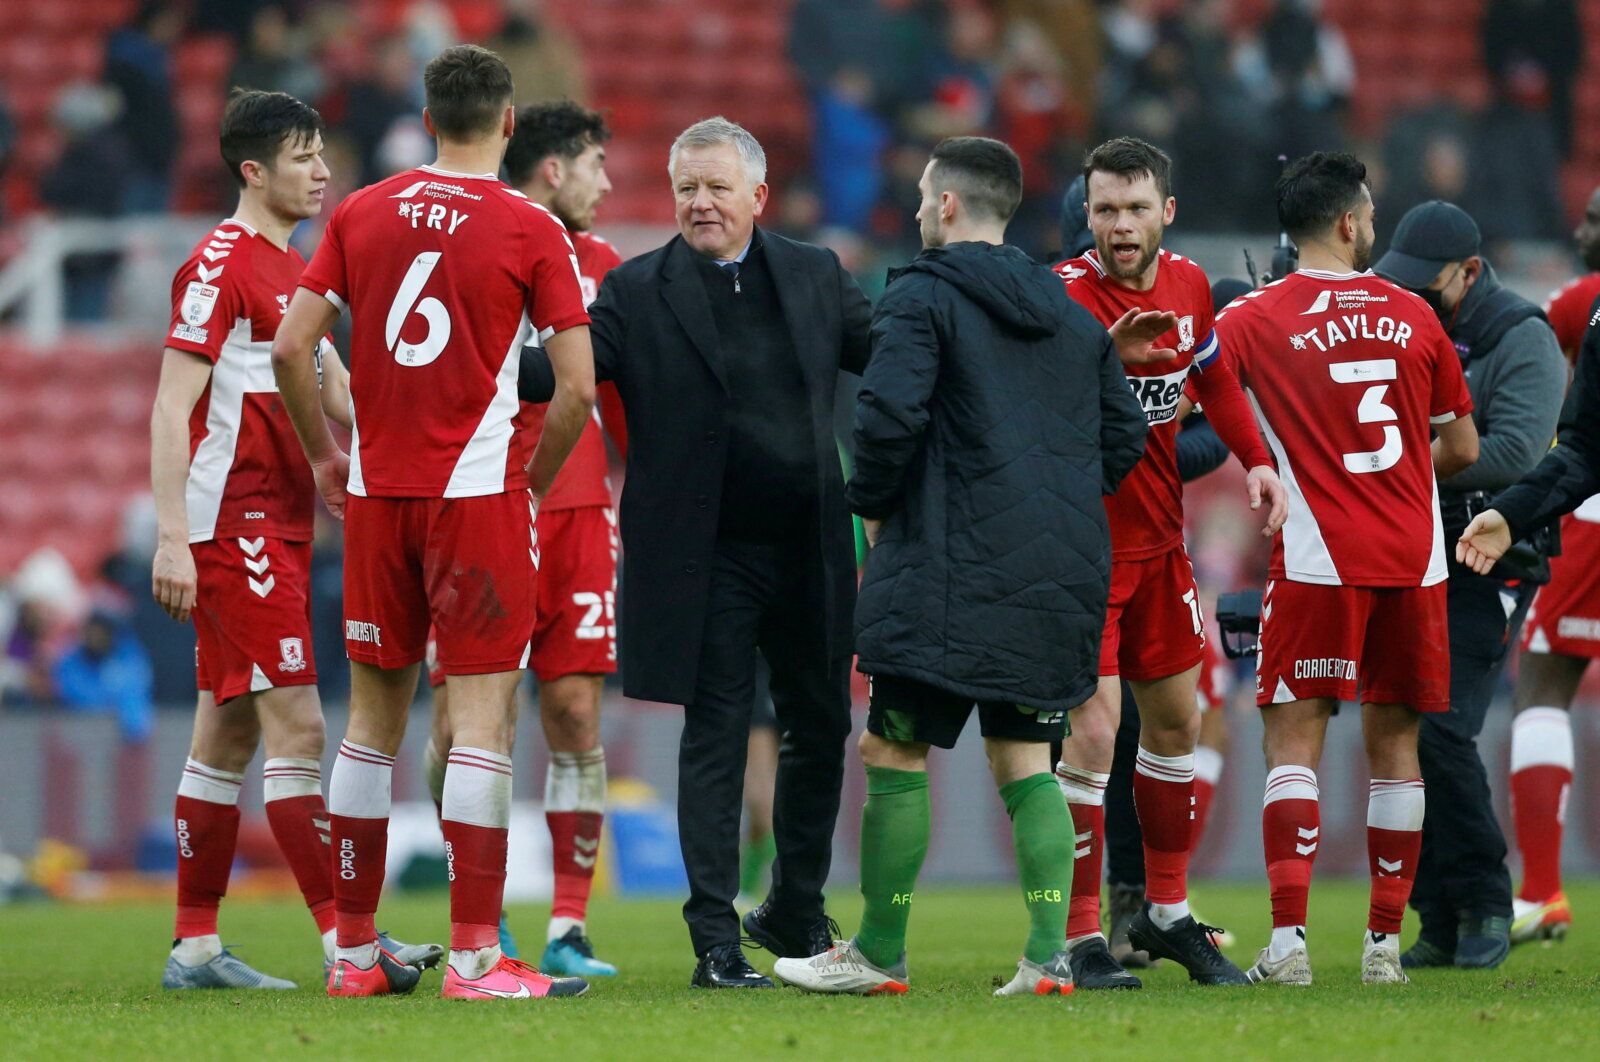 Soccer Football - Championship - Middlesbrough v AFC Bournemouth - Riverside Stadium, Middlesbrough, Britain - December 18, 2021 Middlesbrough manager Chris Wilder celebrates with his players after the match  Action Images/Ed Sykes  EDITORIAL USE ONLY. No use with unauthorized audio, video, data, fixture lists, club/league logos or 